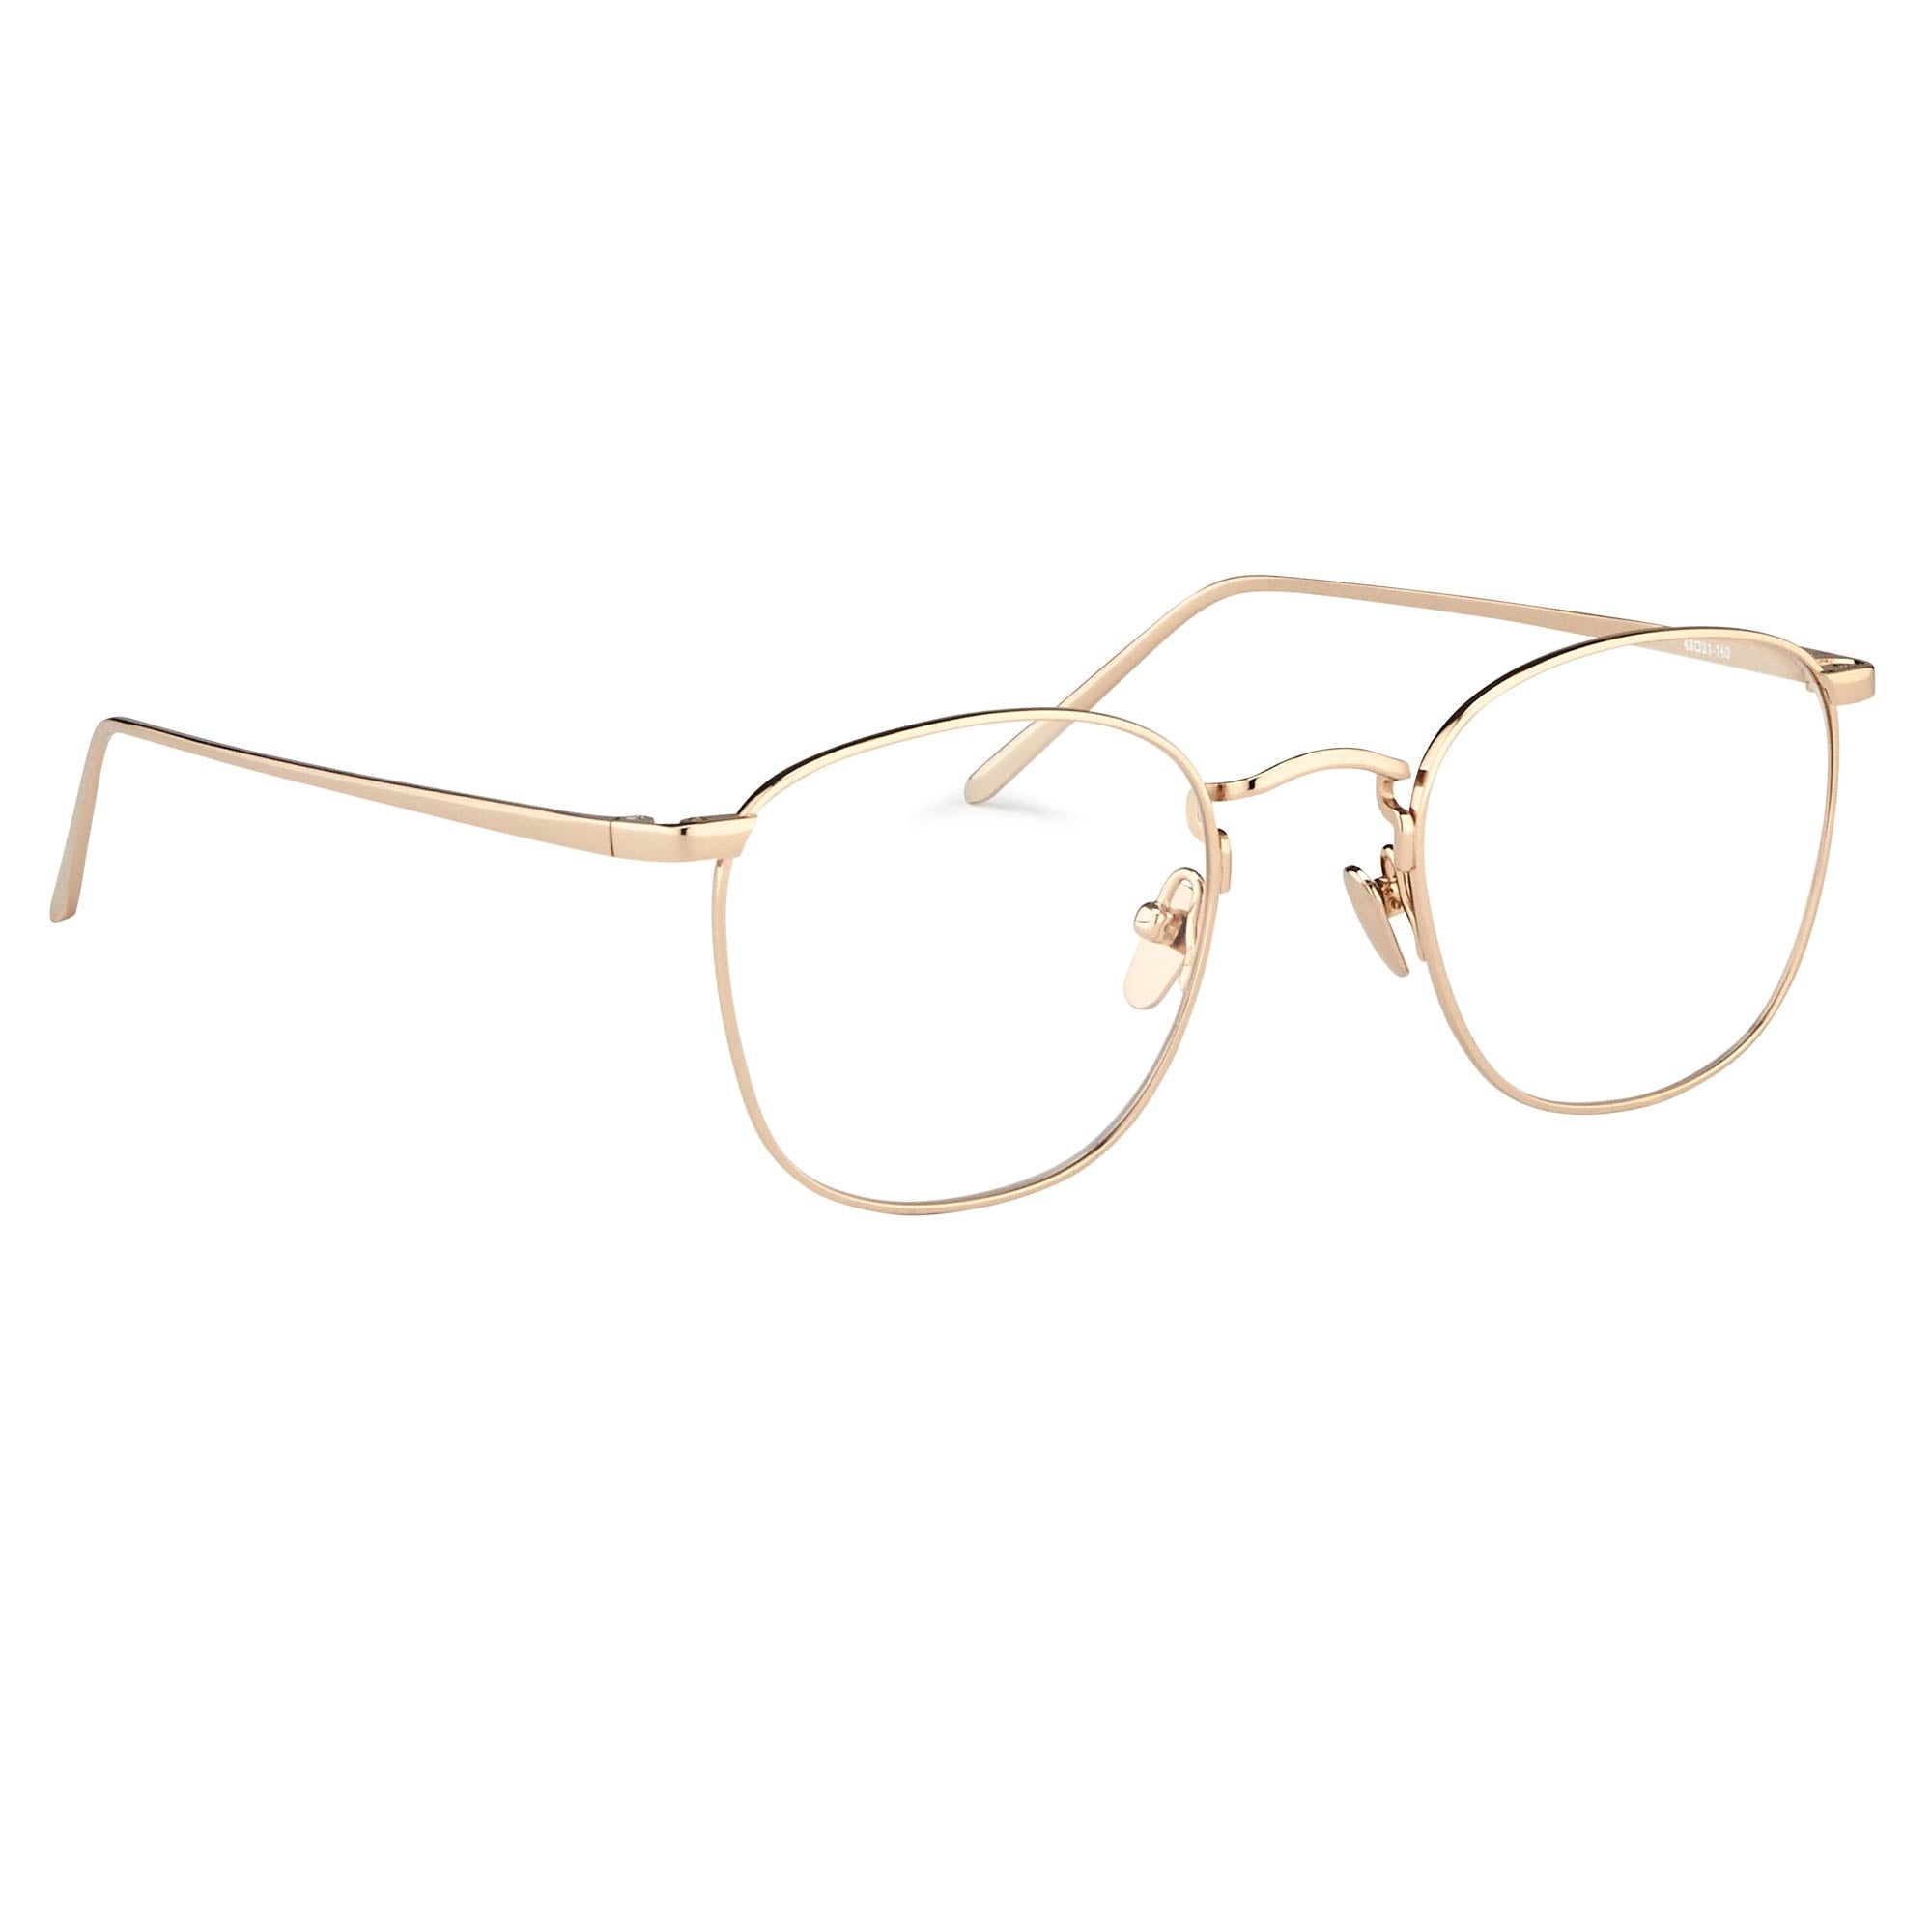 THE SIMON | SQUARE OPTICAL FRAME IN ROSE GOLD (C8) - 2